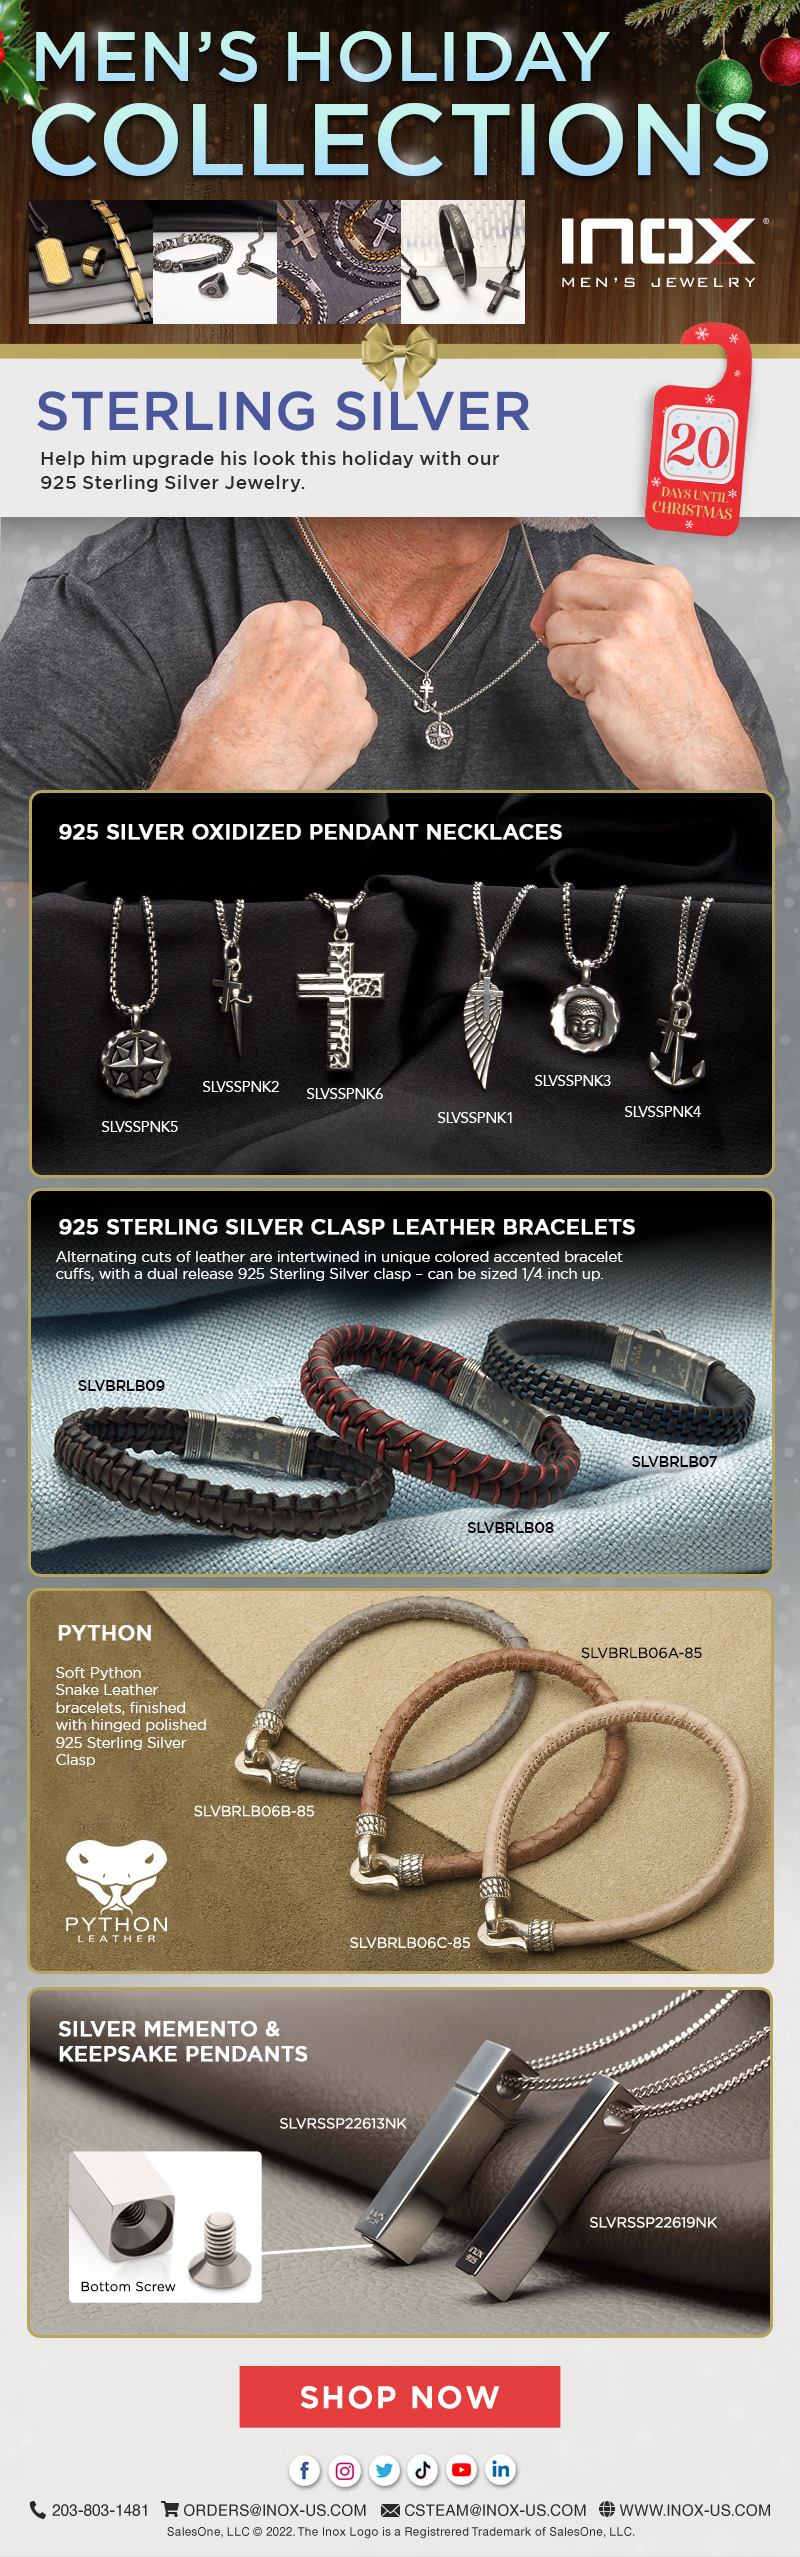 Sterling Silver Jewelry - Men's Holiday Collection from INOX